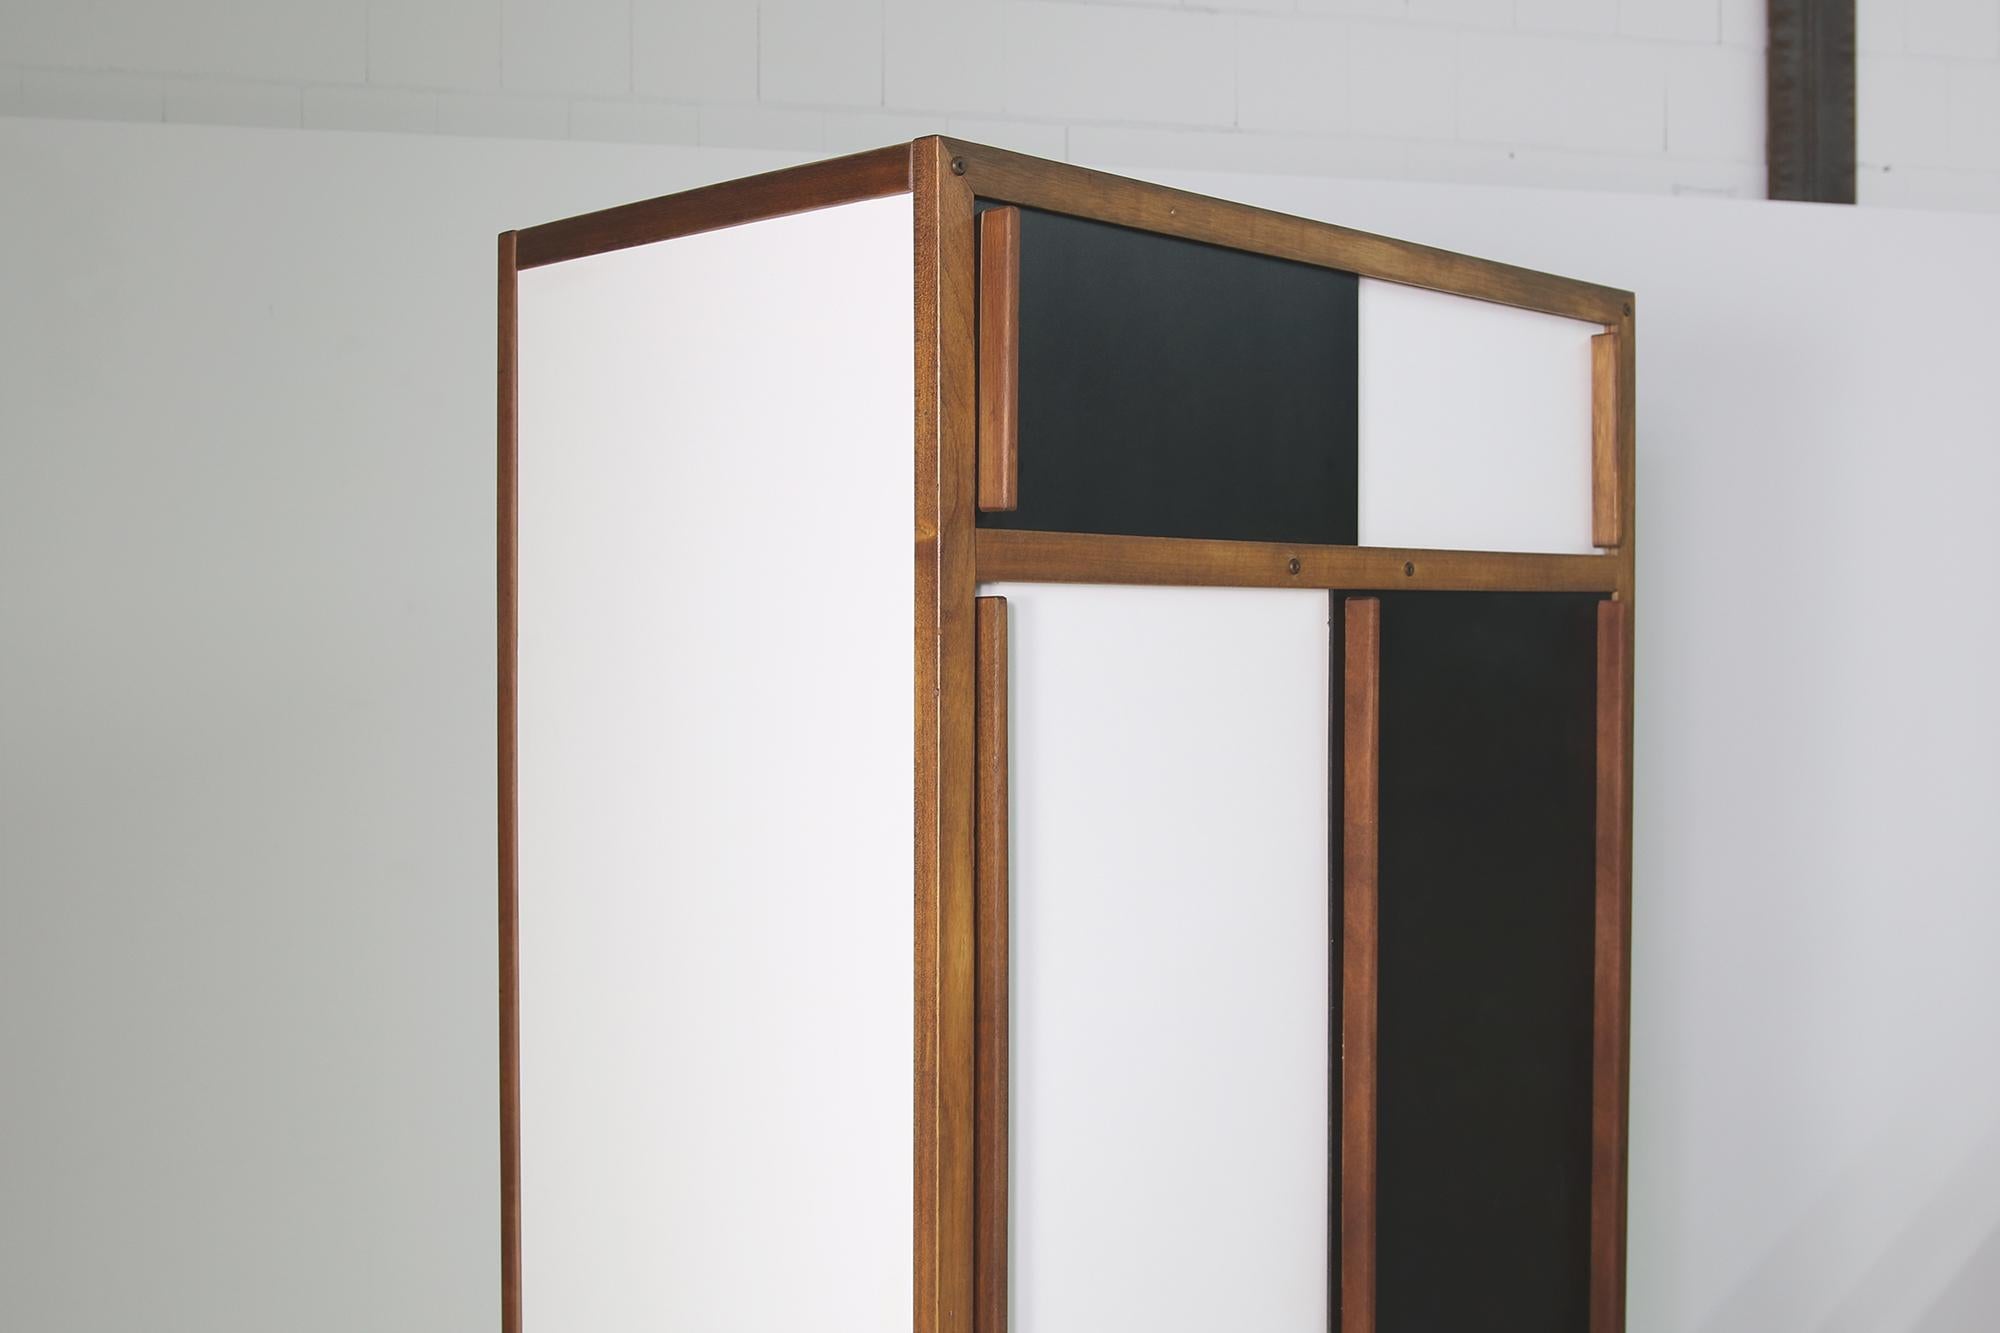 Fantastic vintage cabinet, Andre Sornay, France 1950s, patina, signs of use, was restored a few years ago, solid teak handles, sliding doors, black and white black metal base, the large doors don't close always perfectly, dry, no smell, clean.